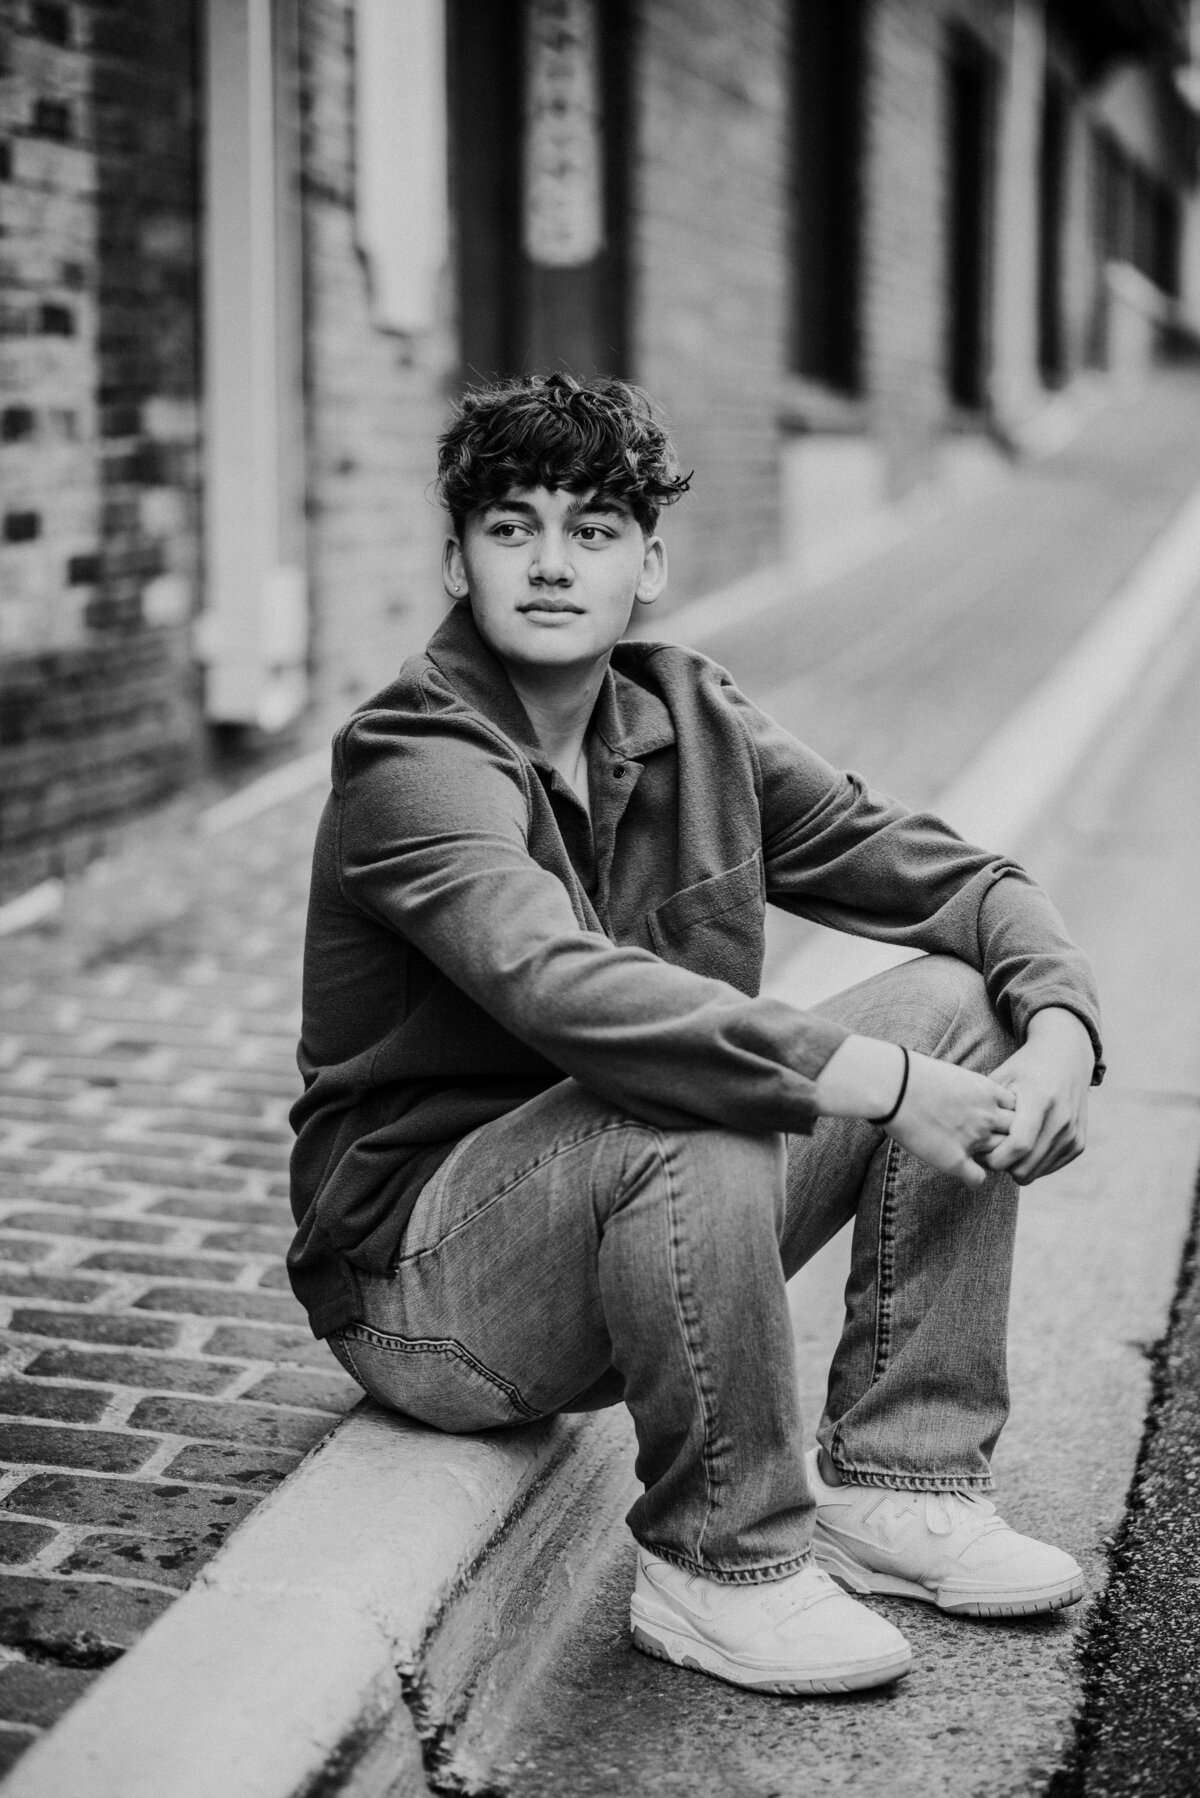 Amidst the charming streets of downtown Stillwater, another Stillwater High School graduate takes center stage in this senior portrait. Seated on a curb, he gazes wistfully into the distance, capturing the spirit of a young graduate ready to explore new horizons in the backdrop of a historic town.